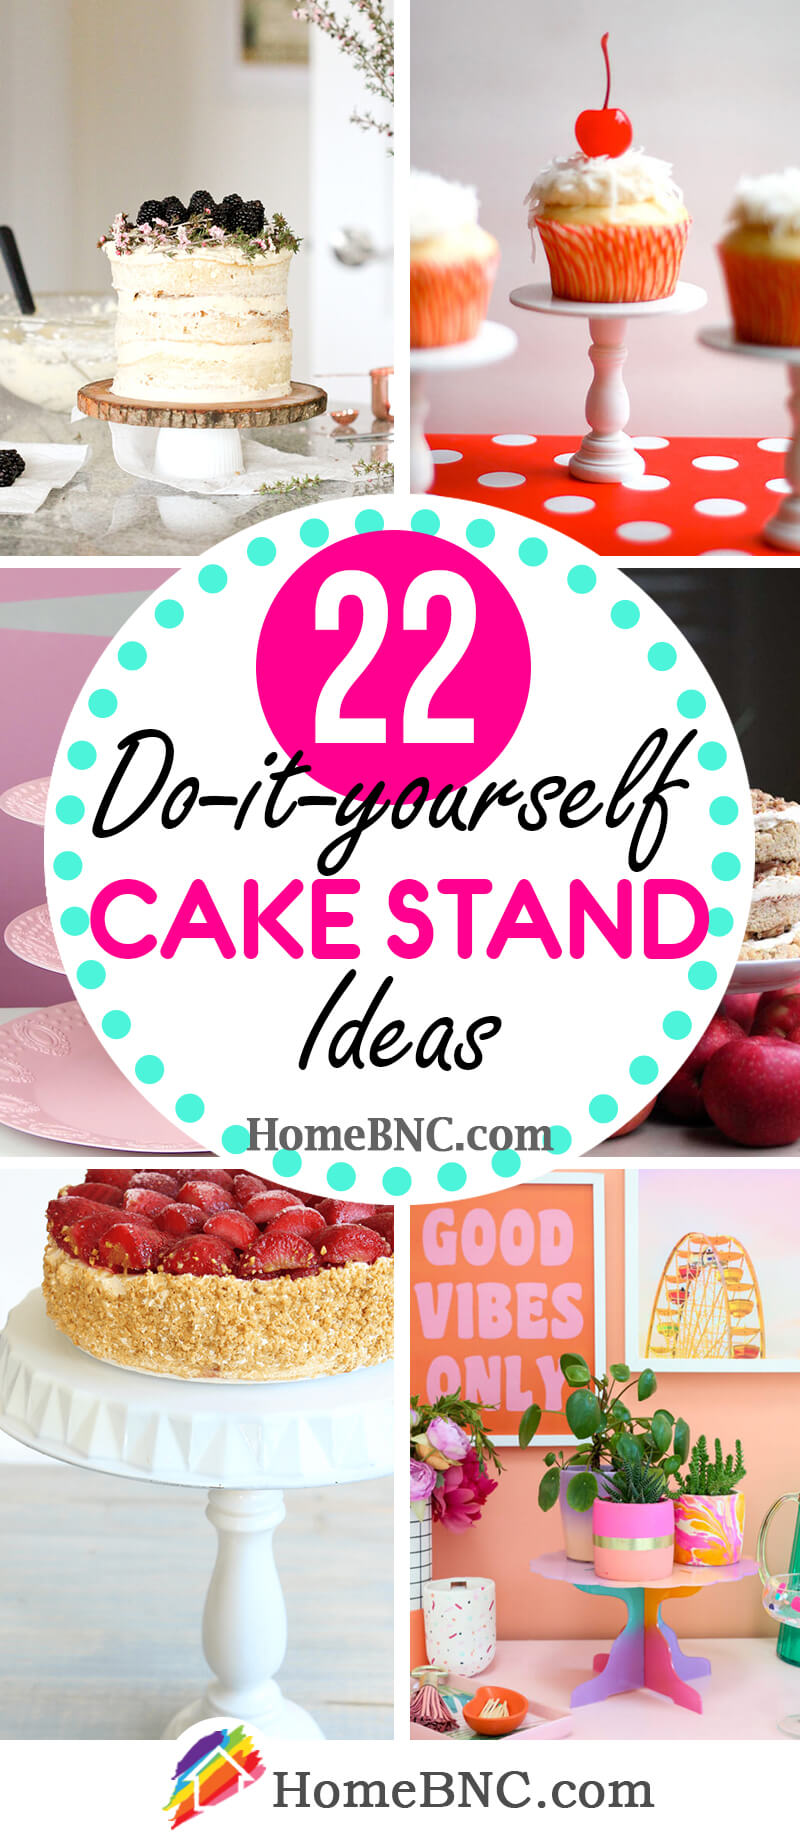 DIY Industrial Style Cake Stand - In Easy 3 Steps - Anika's DIY Life